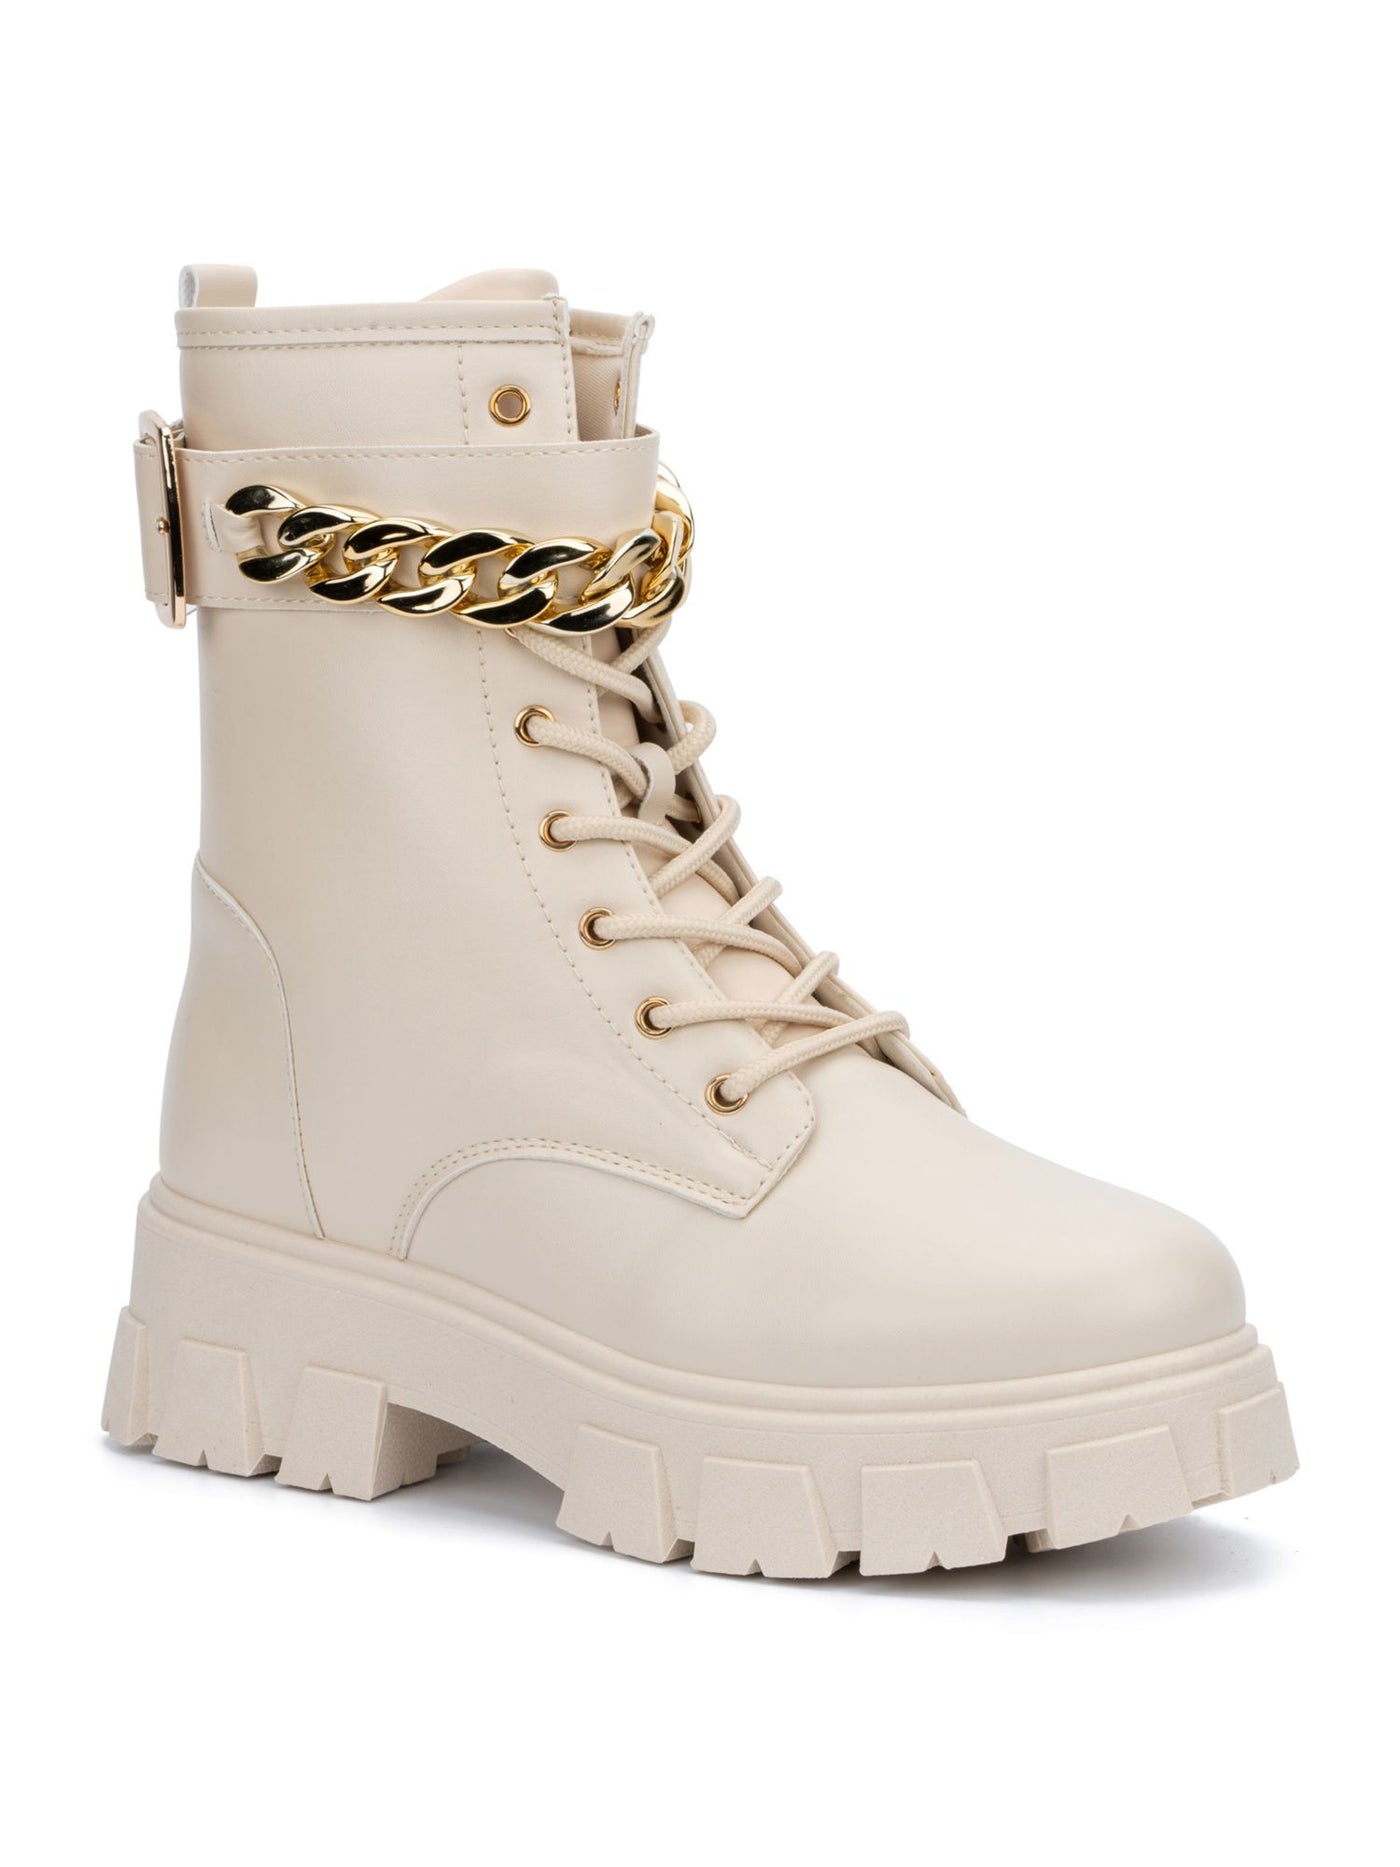 OLIVIA MILLER Womens Beige 1-1/2" Platform Lace-Up Front Chain Buckled Strap Back Pull-Tab Lug Sole Padded Ava Round Toe Zip-Up Combat Boots 8.5